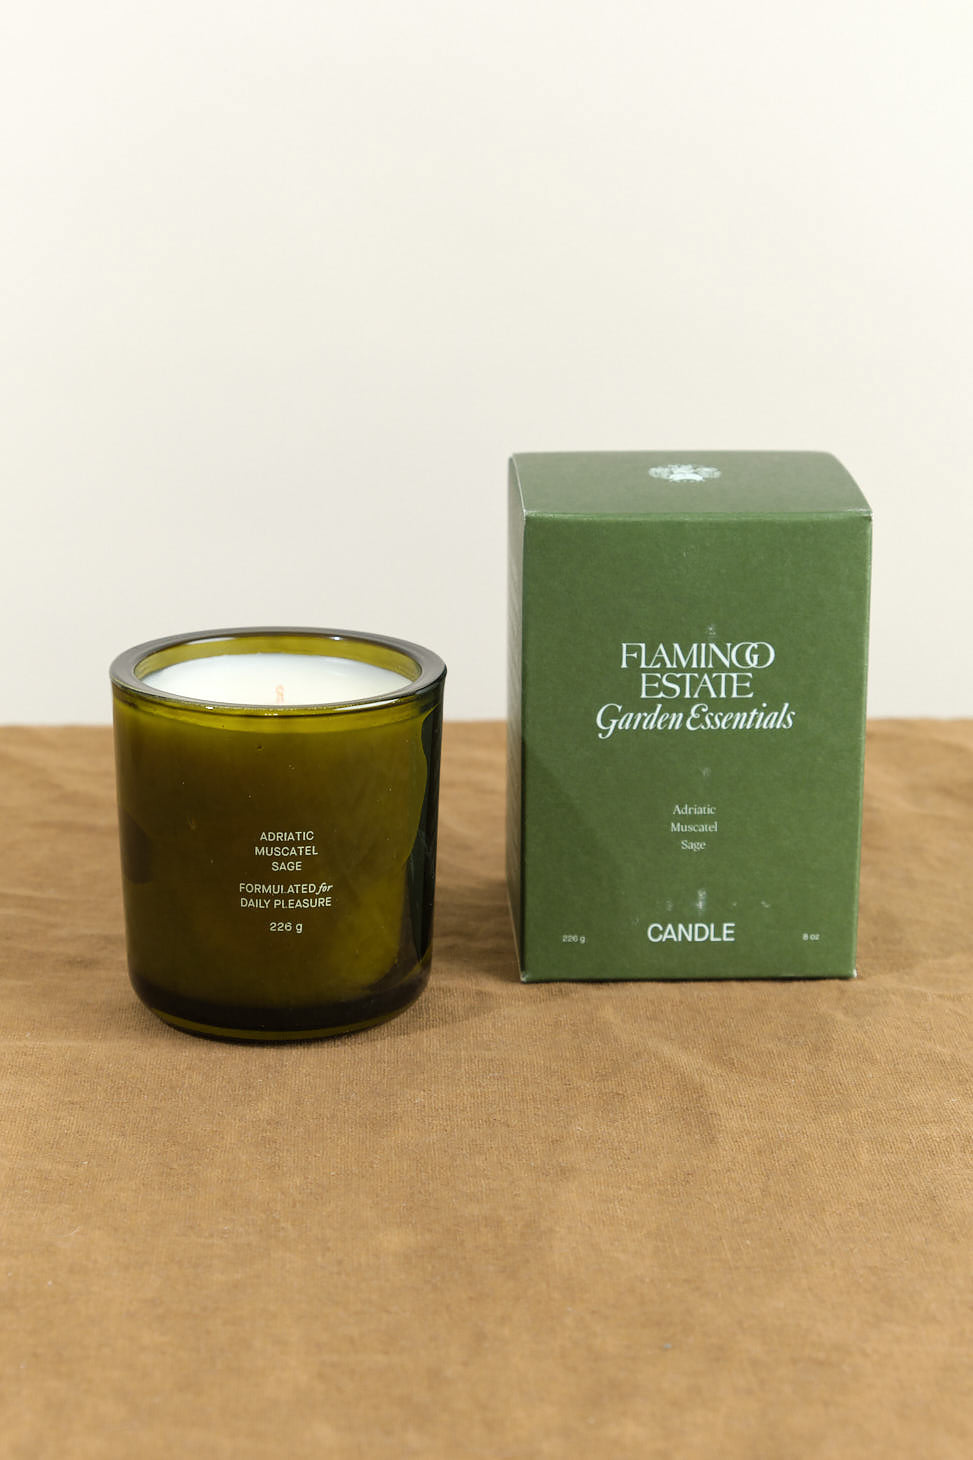 Adriatic Muscatel Sage Candle with box